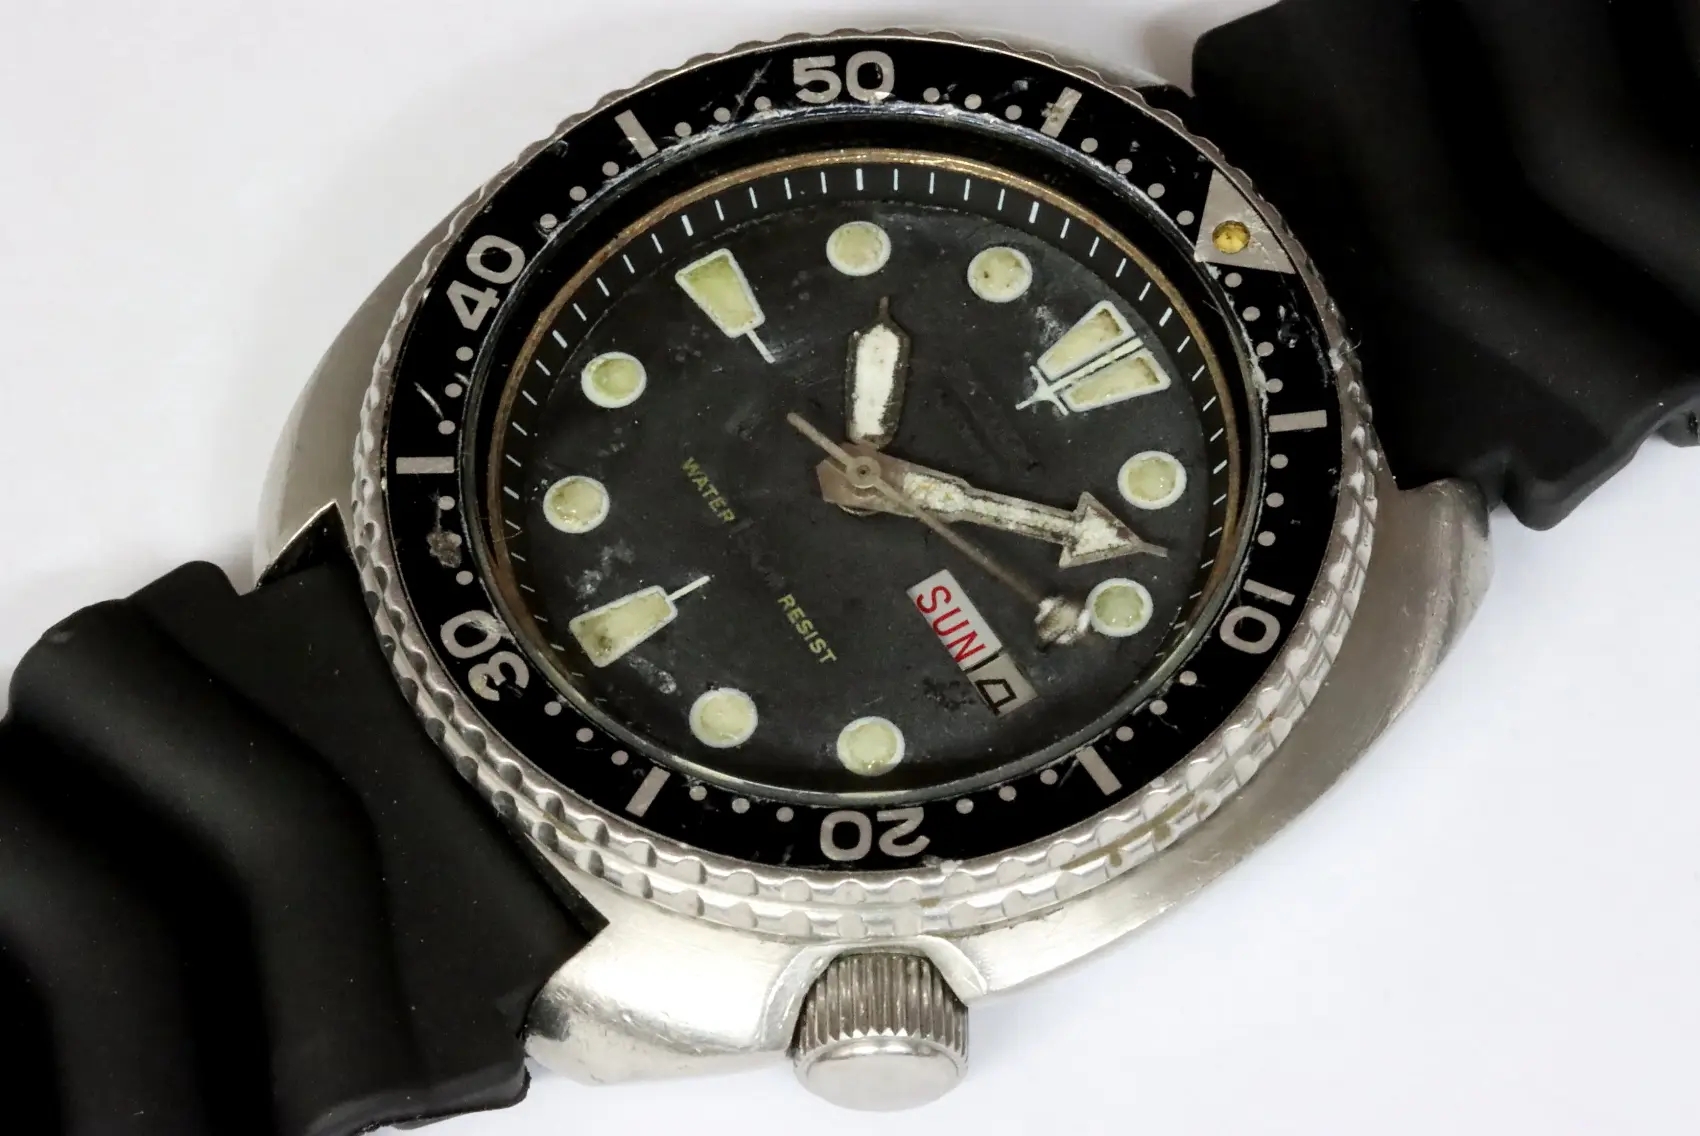 Seiko 6309-7040 diver's watch with dial in poor condition